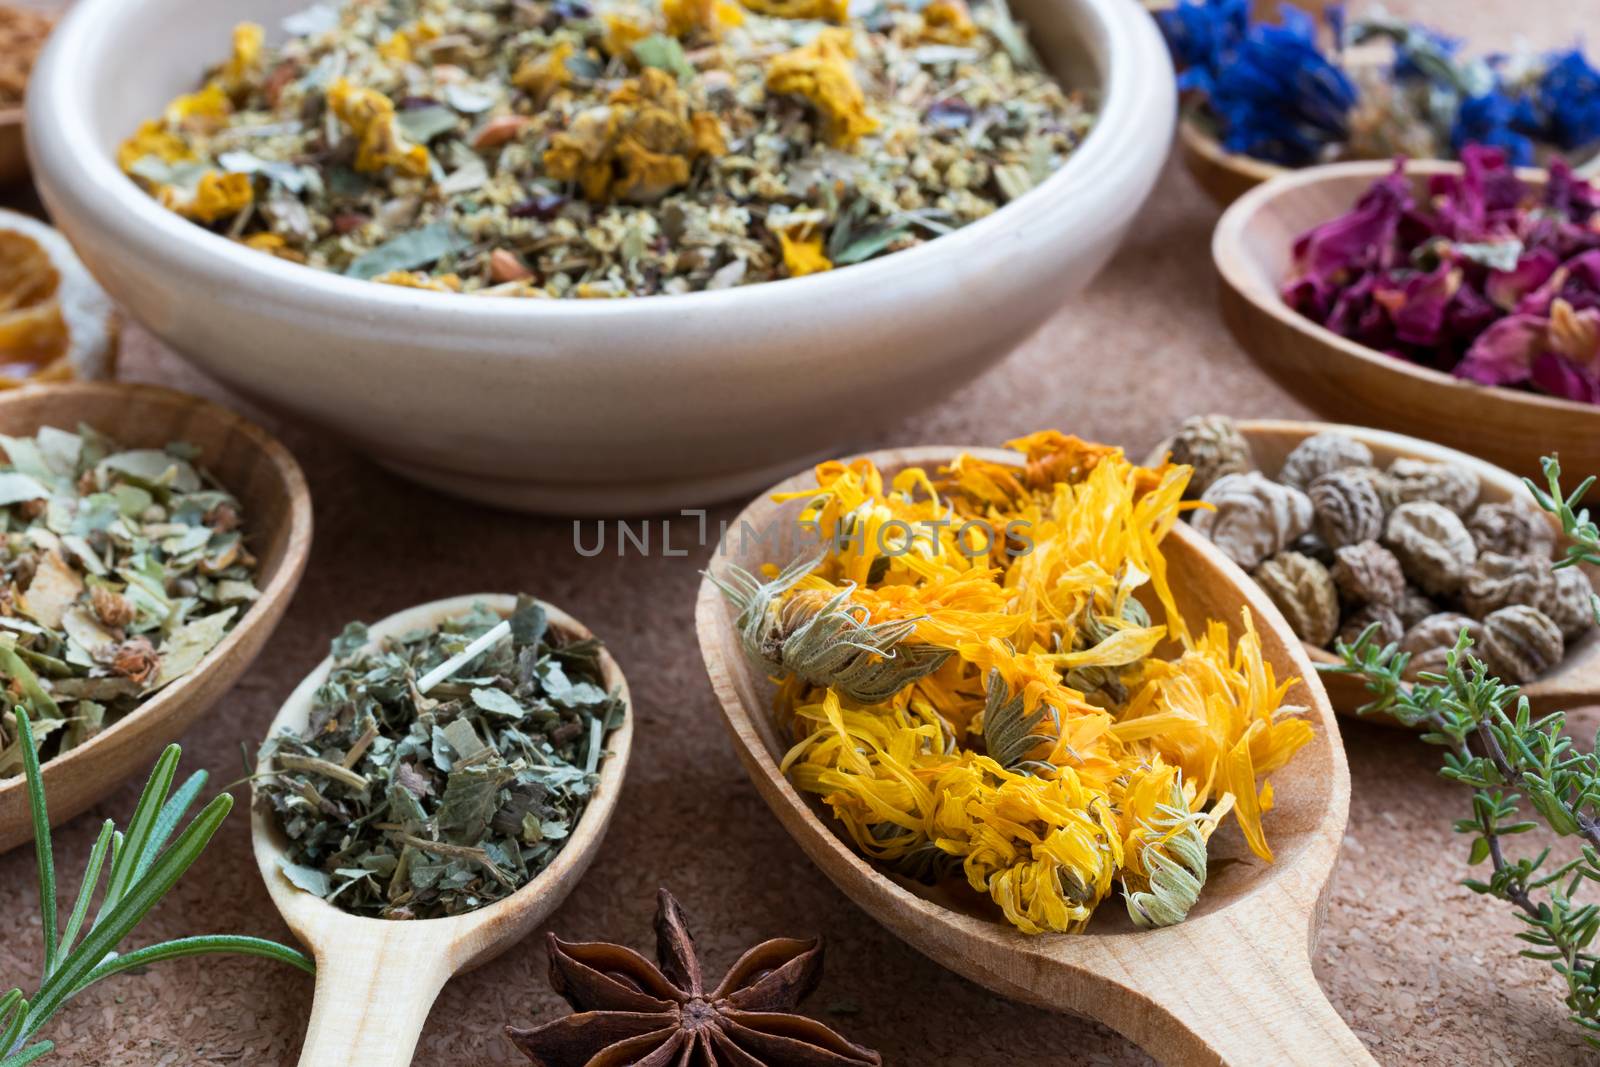 Dried calendula on a wooden spoon, with other herbs in the background (nasturtium seeds, cornflower, rose petals, star anise, thyme, rosemary, alchemilla)